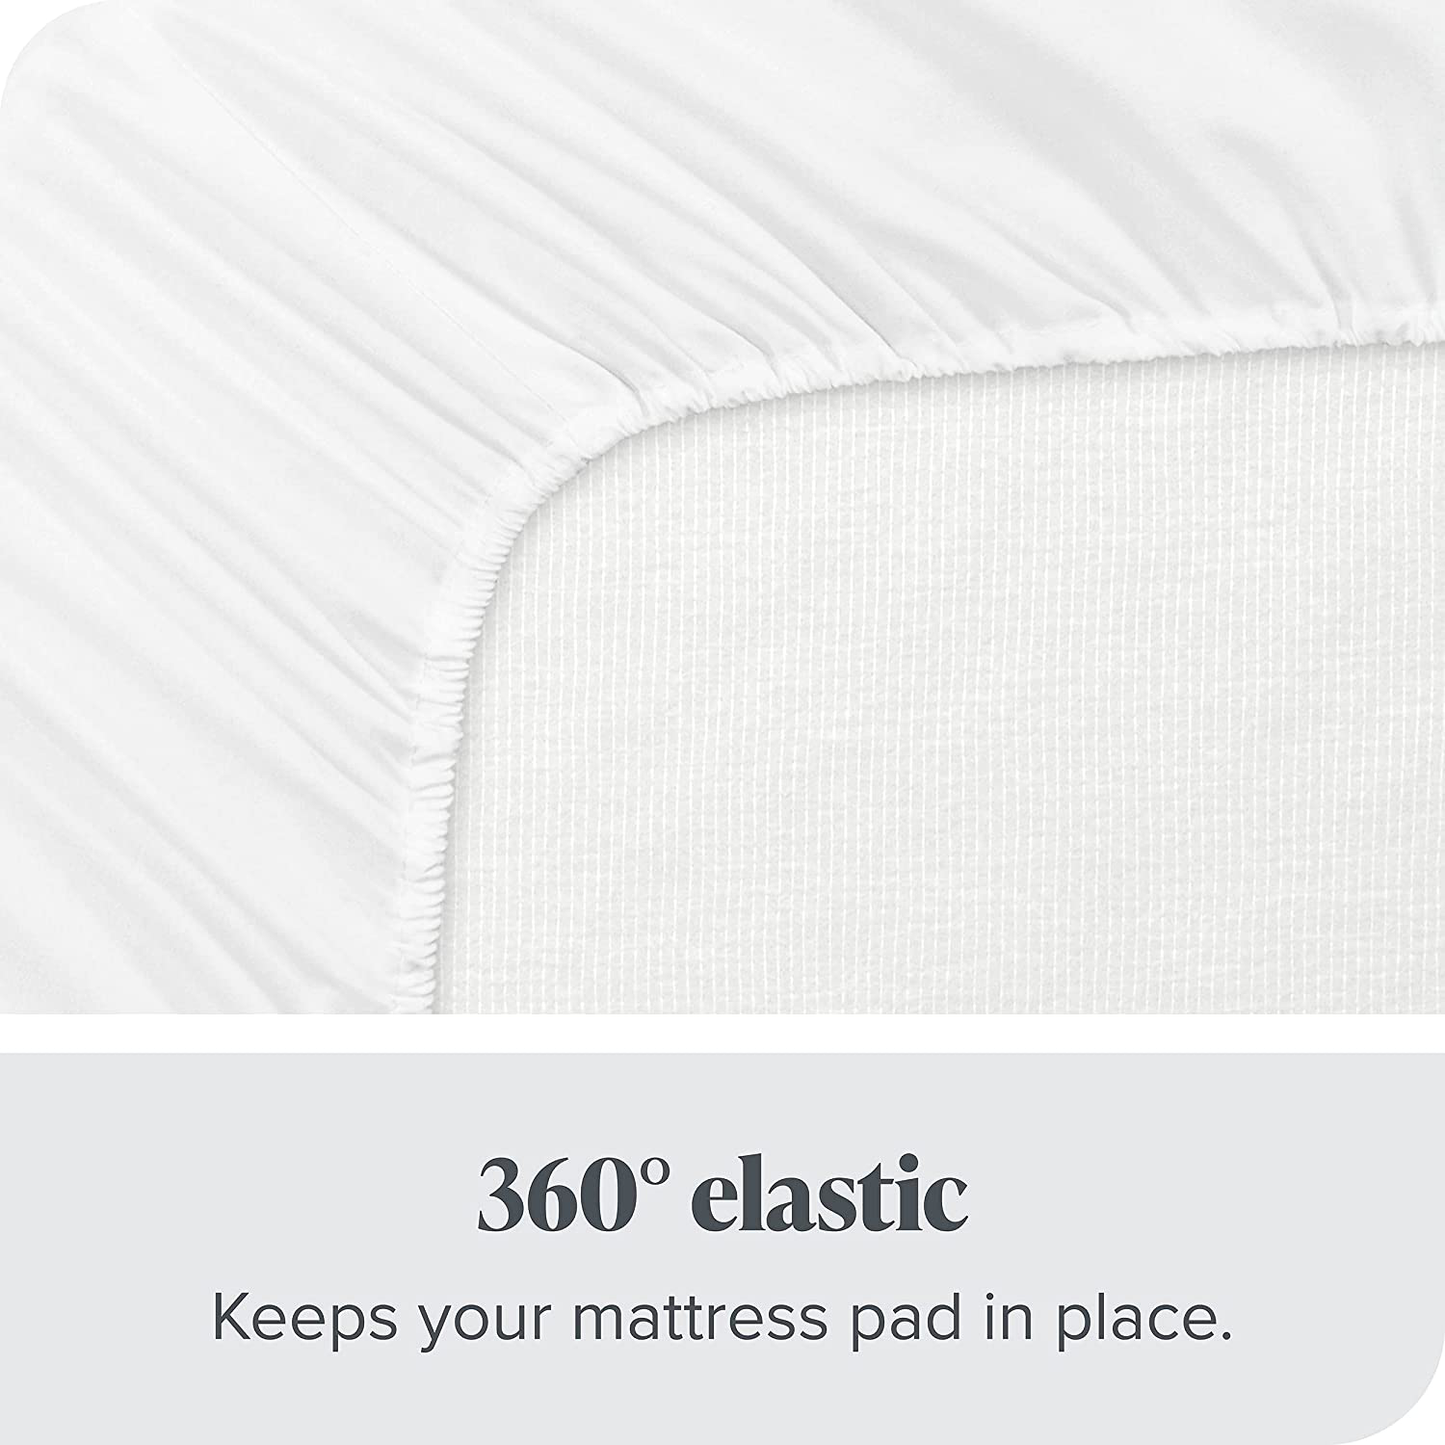 Bare Home Quilted Fitted Mattress Pad (Full) - Cooling Mattress Topper - Easily Washable - Elastic Fitted Mattress Cover - Stretch-to-Fit up to 15 Inches Deep (Full)